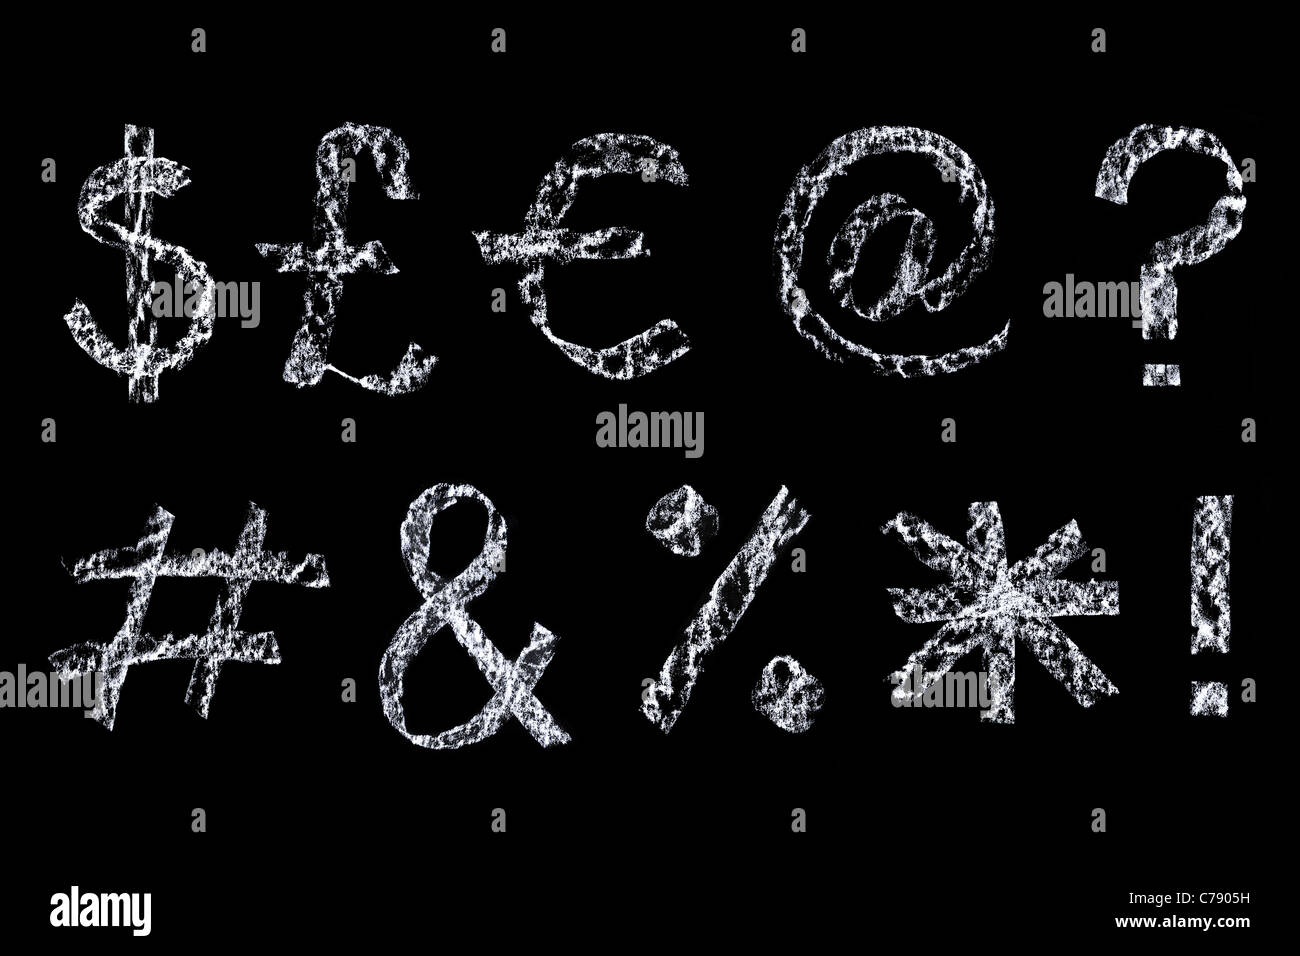 Handwritten symbols drawn on a blackboard, cleaned up during editing and placed on a black background. Stock Photo